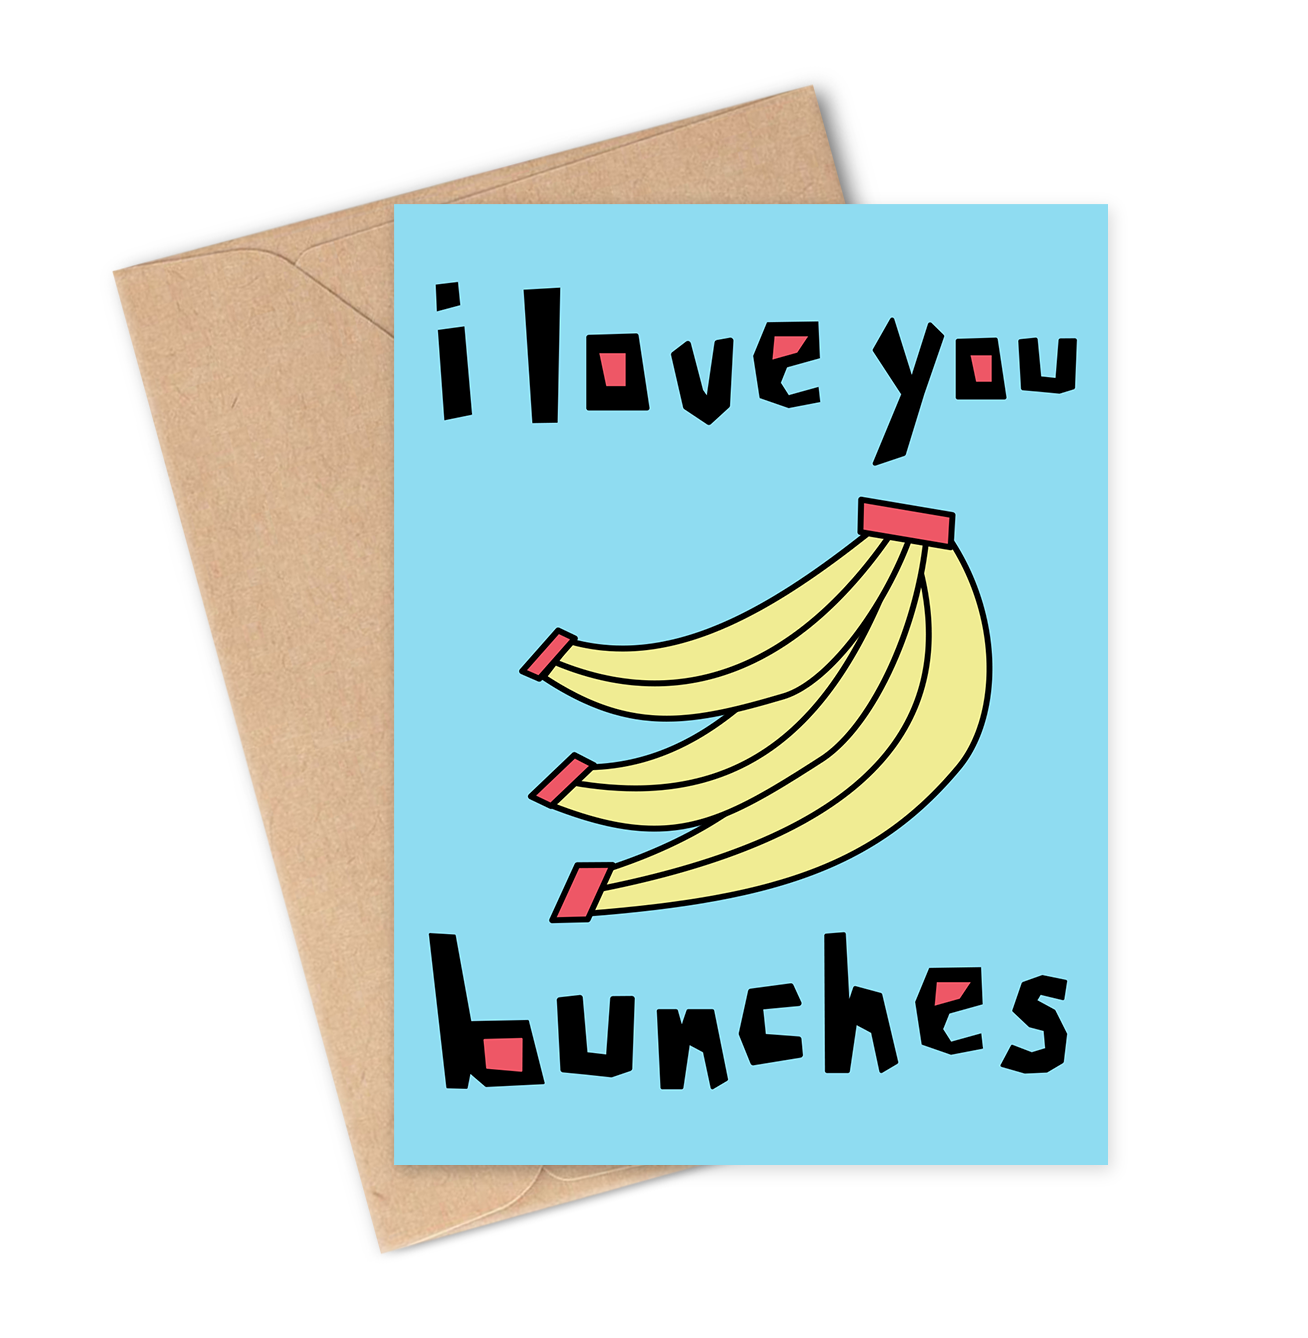 I love you bunches greeting card with bananas and blue background 